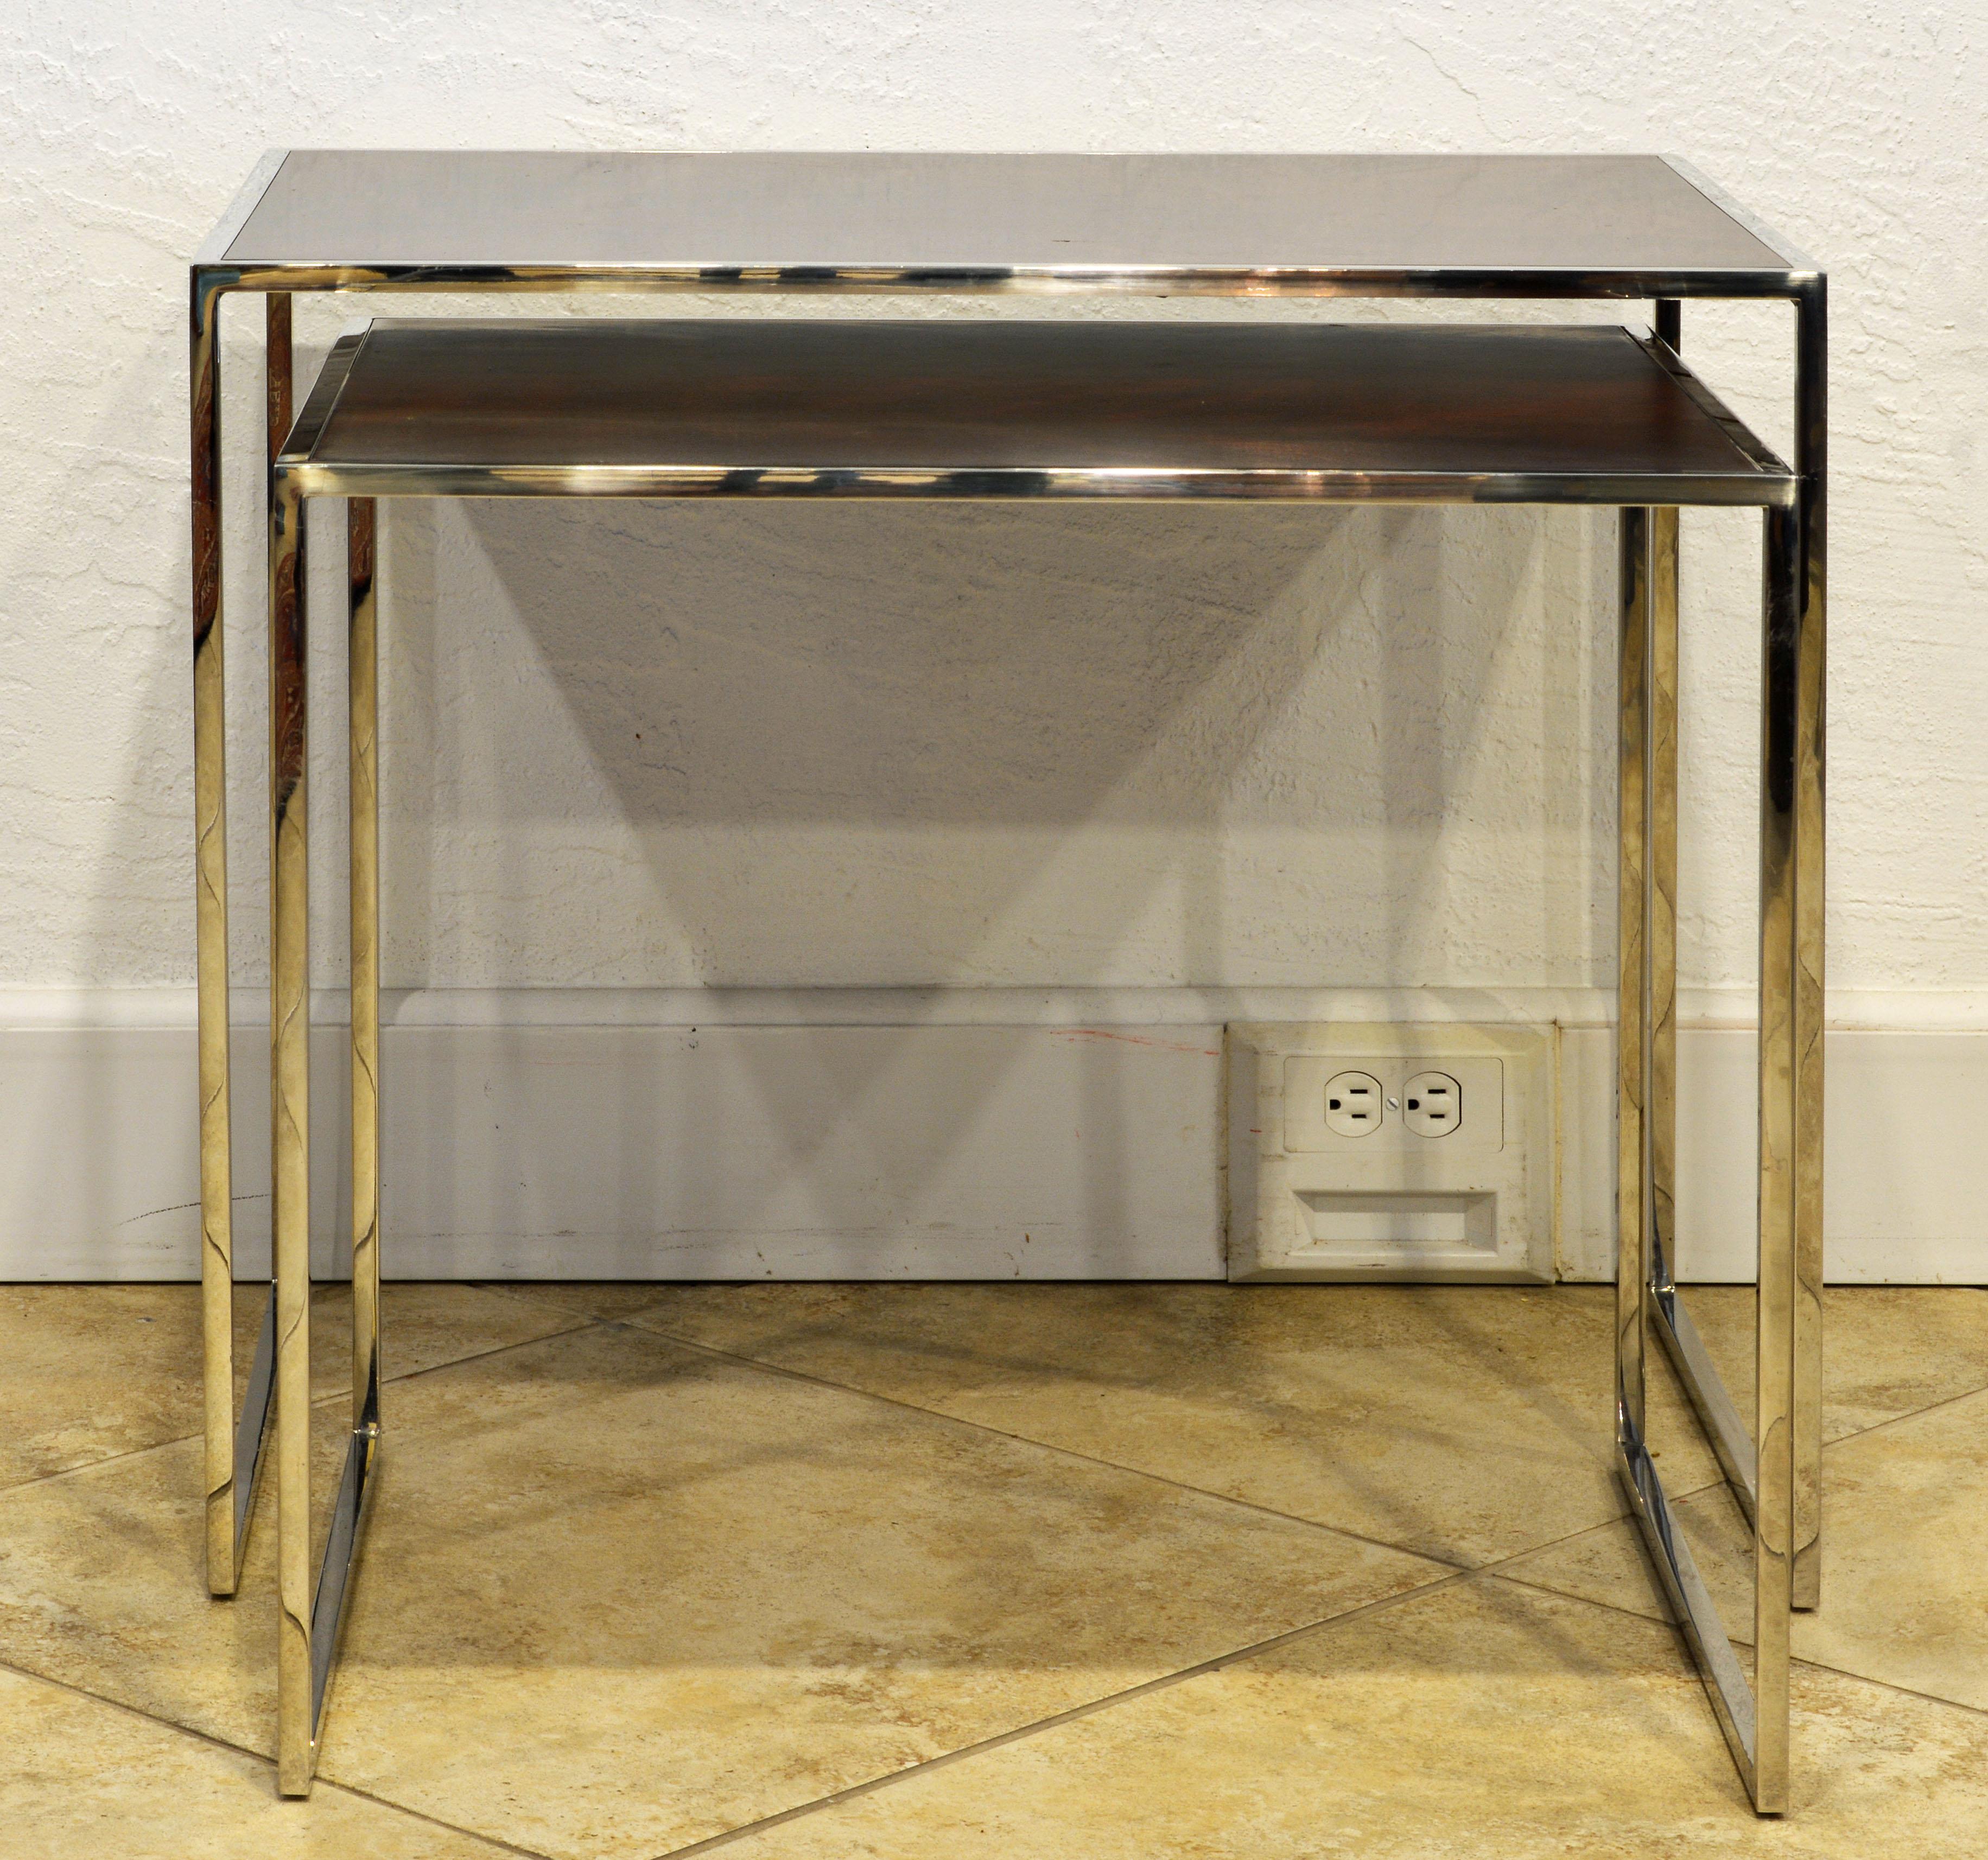 The tables features panel Santos Rosewood tops set in frames of polished stainless steel. A very elegant design by Michael Kirkpatrick who is known also for being leading designer for Ralph Lauren and Calvin Klein. The smaller table bears the Decca